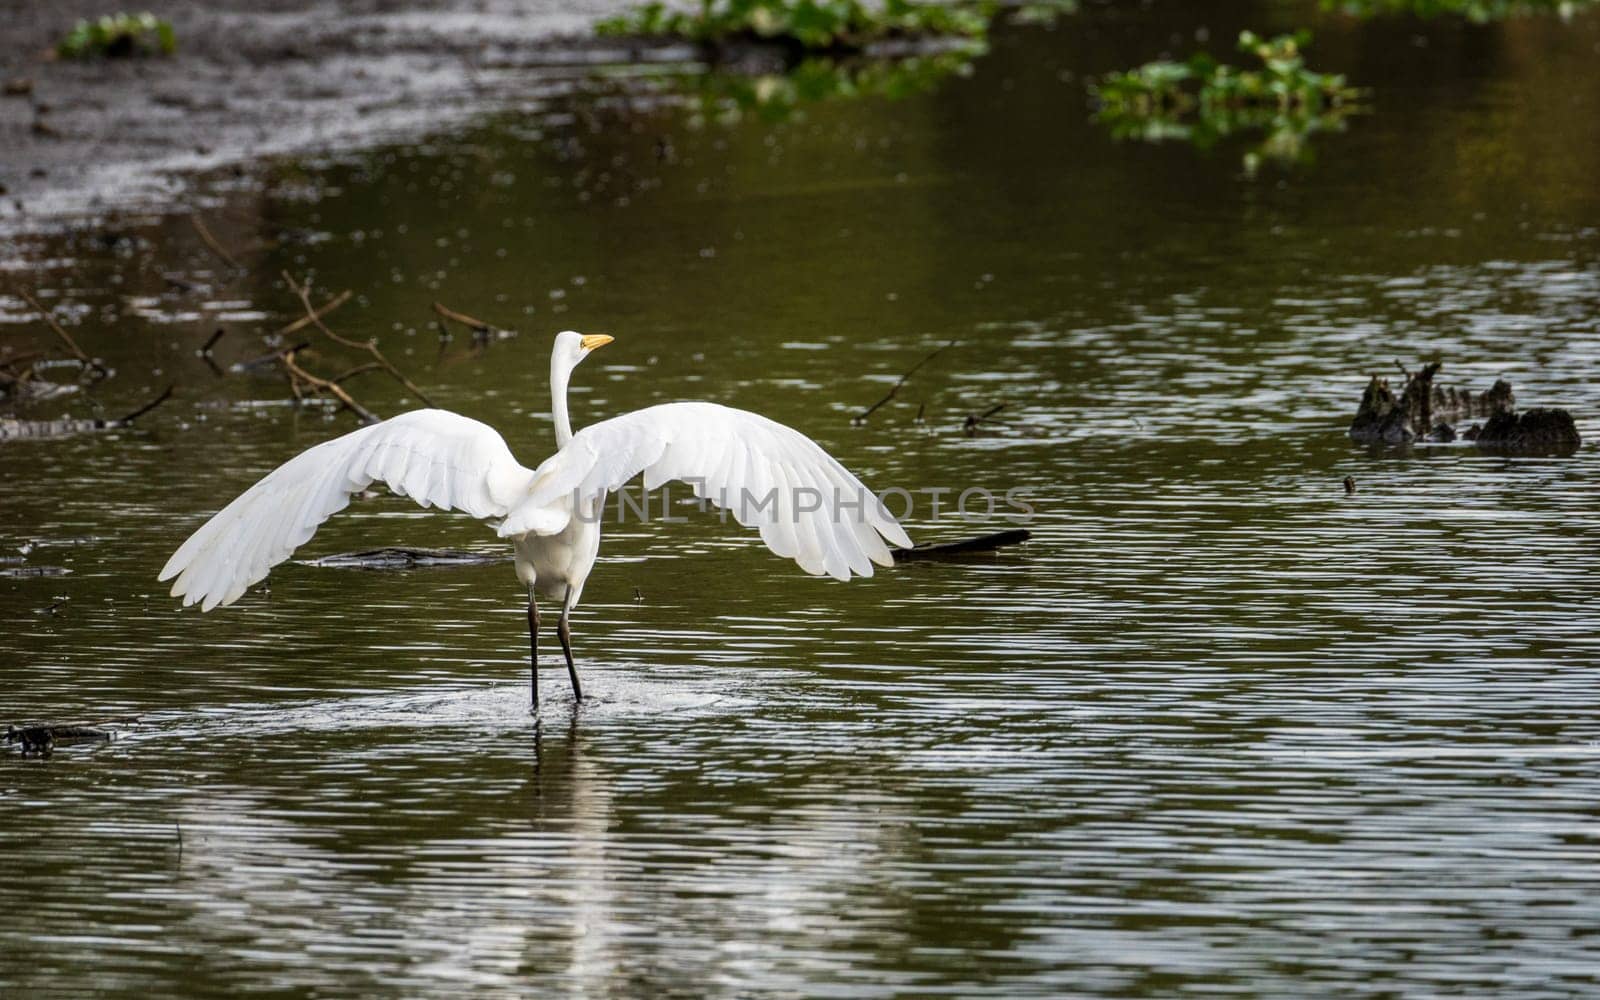 Great Egret bird wading with outstretched wings by stumps of bald cypress trees in Atchafalaya Basin near Baton Rouge Louisiana